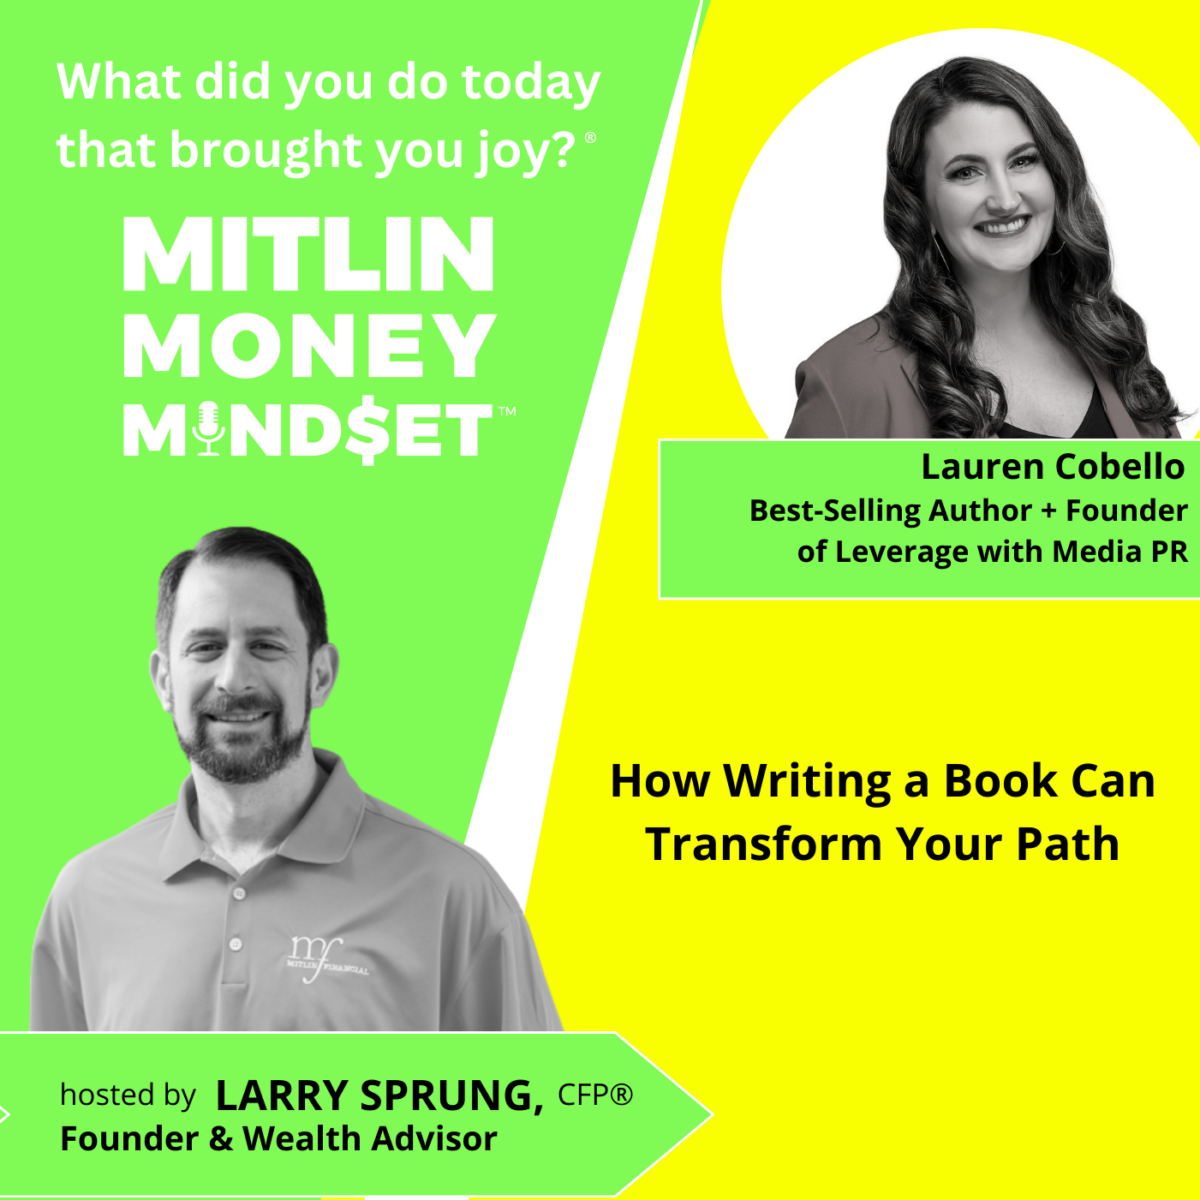 How Writing a Book Can Transform Your Path with Lauren Cobello, Episode #169